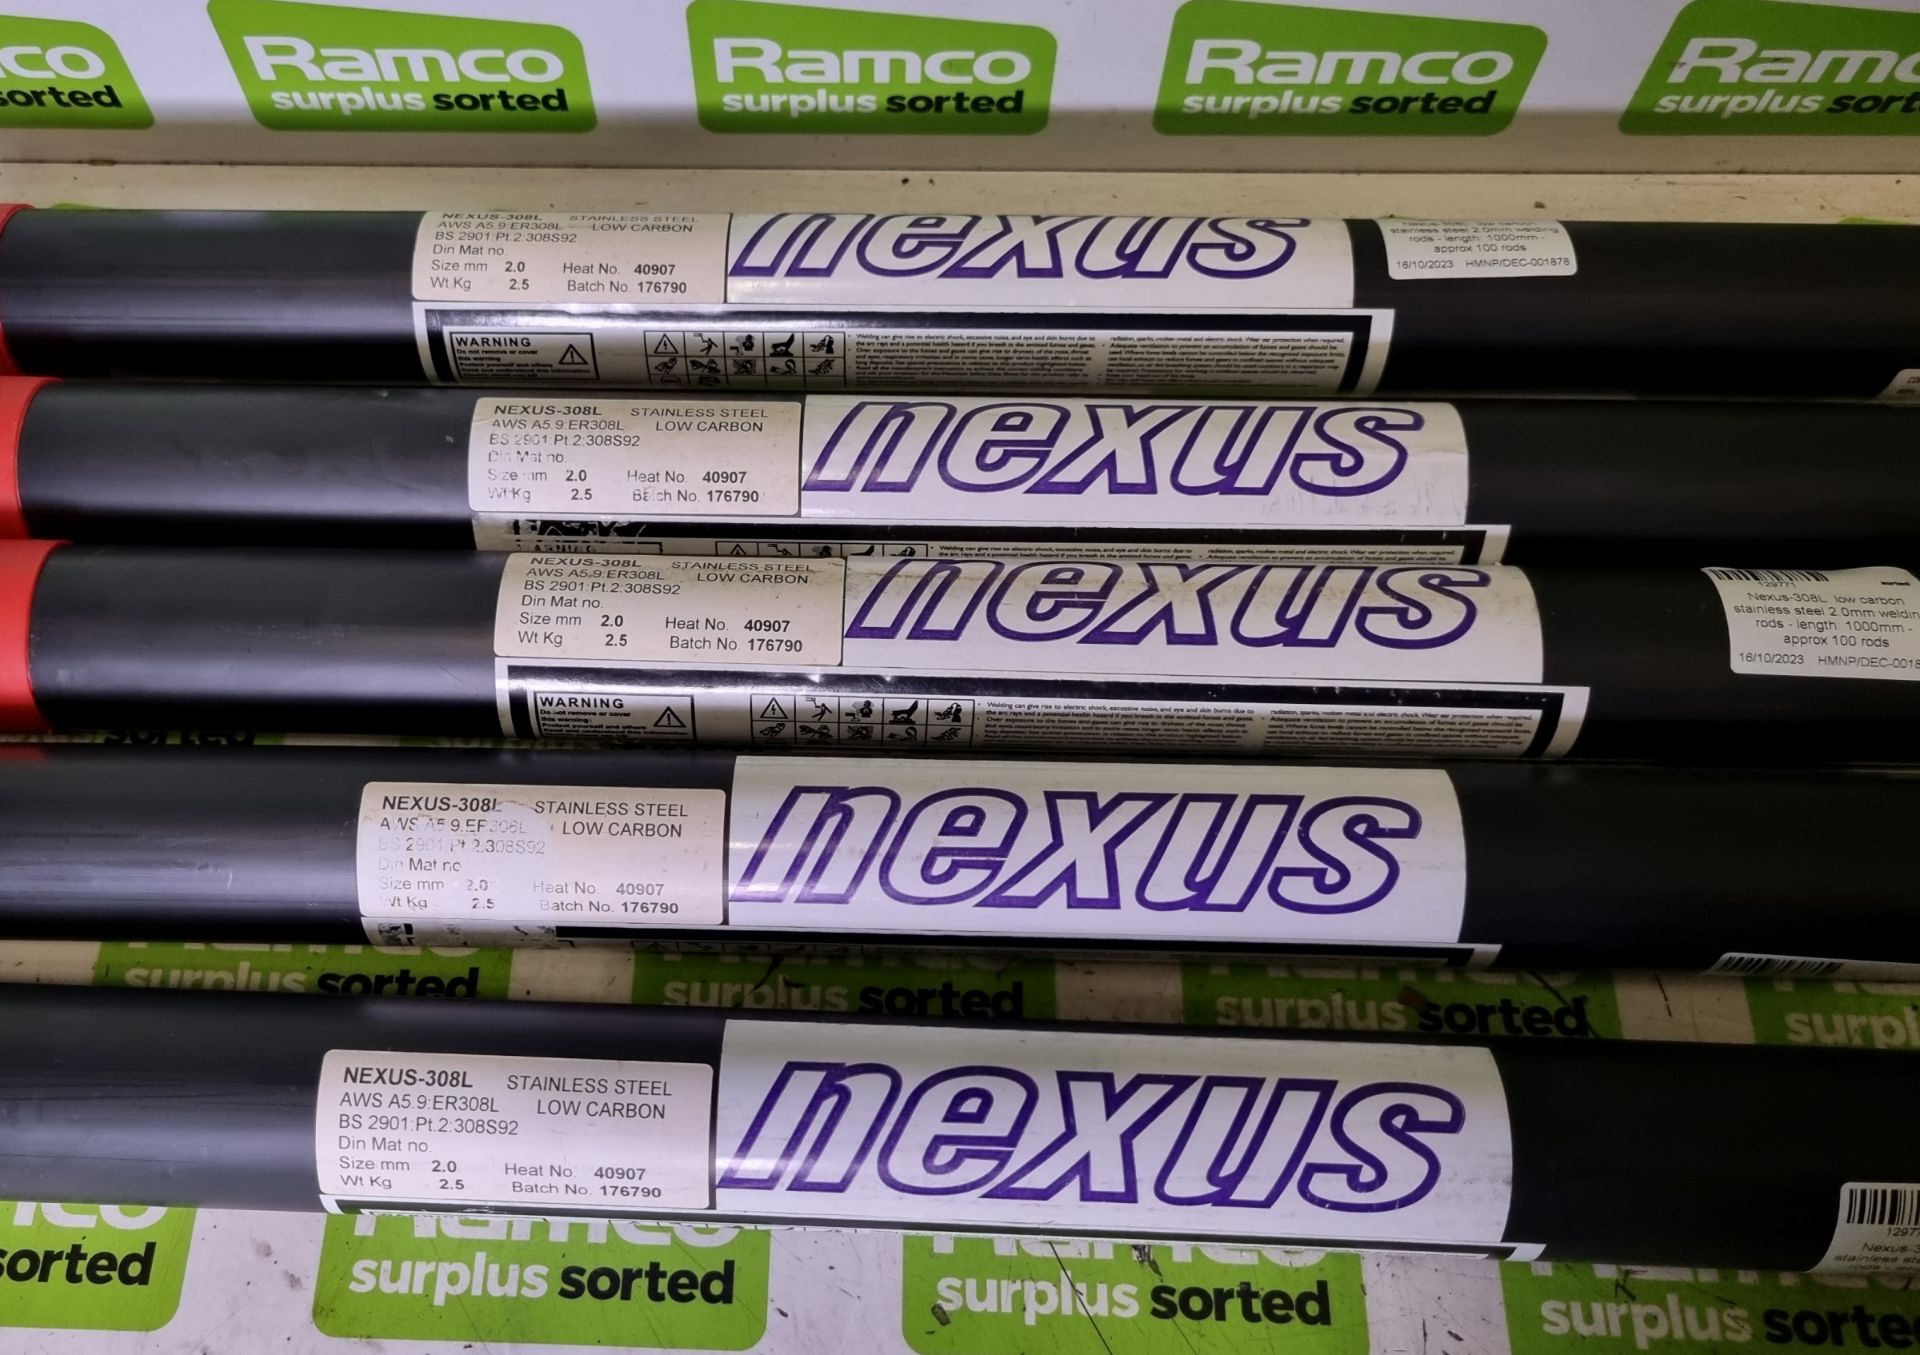 5x tubes of Nexus-308L low carbon stainless steel 2.0mm welding rods - length: 1000mm - Image 2 of 5